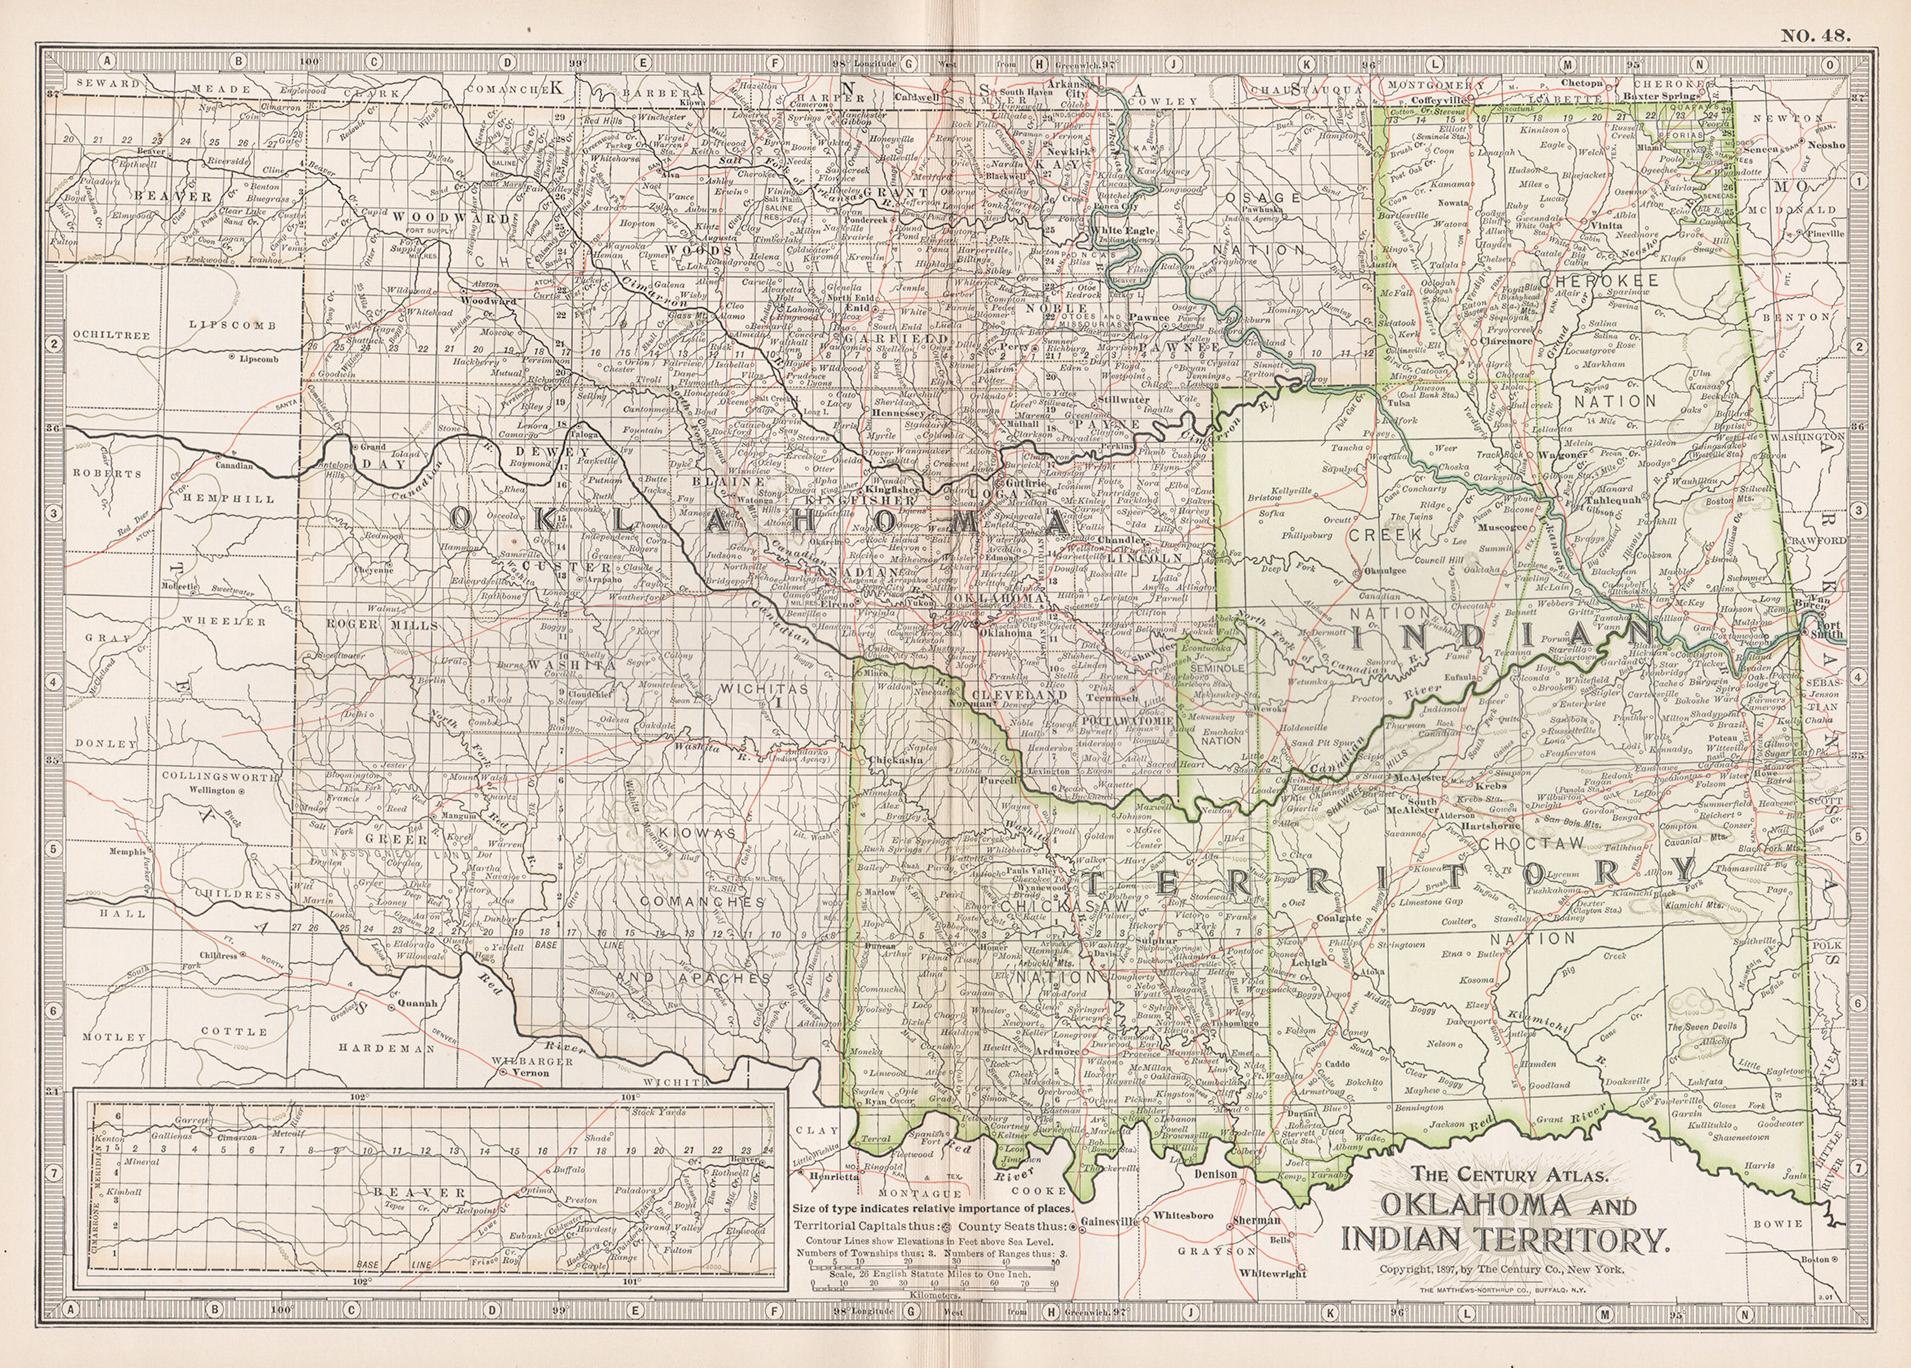 Oklahoma and Indian Territory. USA. Century Atlas state antique vintage map